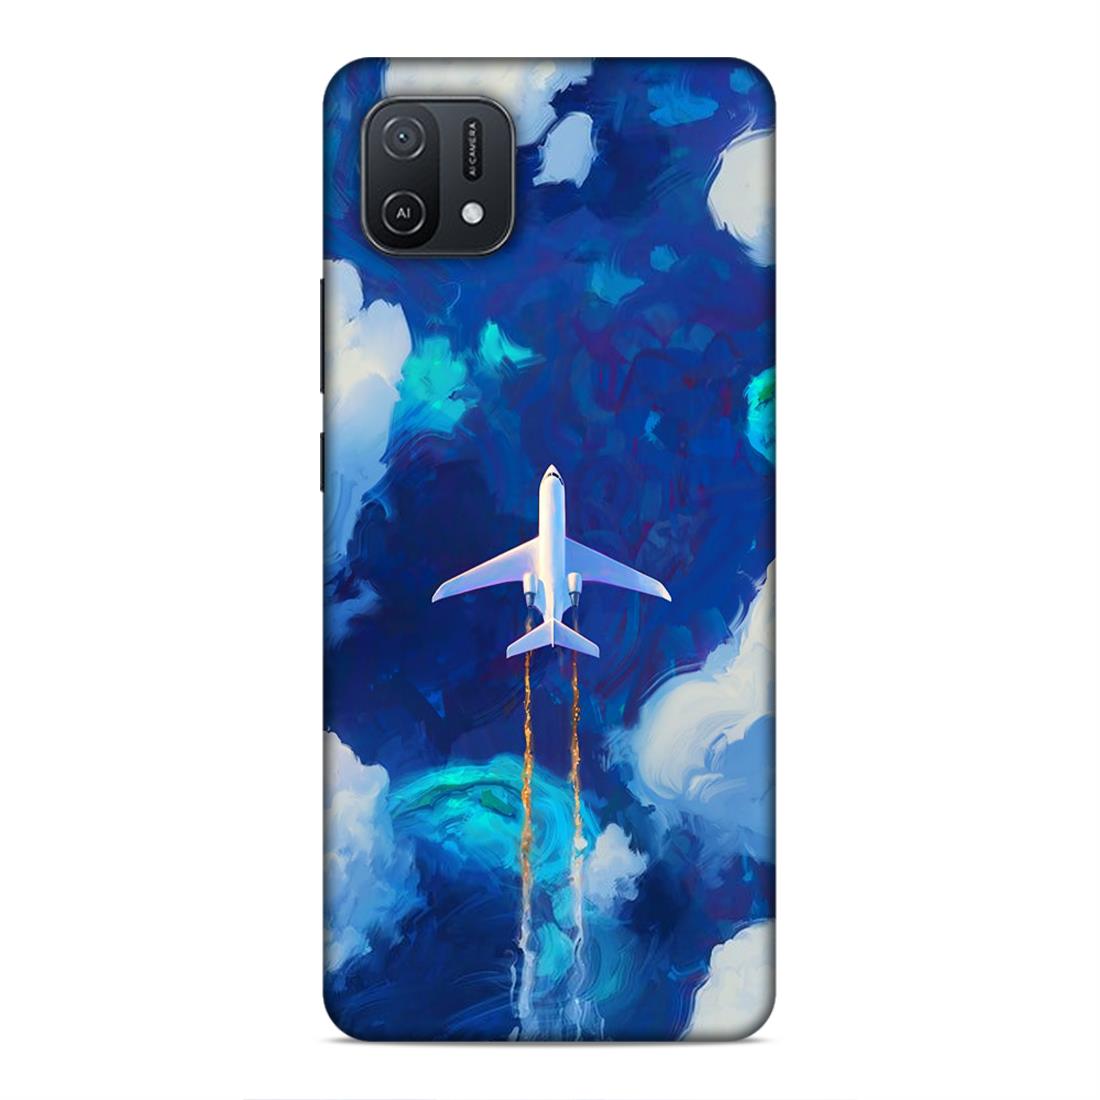 Aeroplane In The Sky Hard Back Case For Oppo A16e / A16k